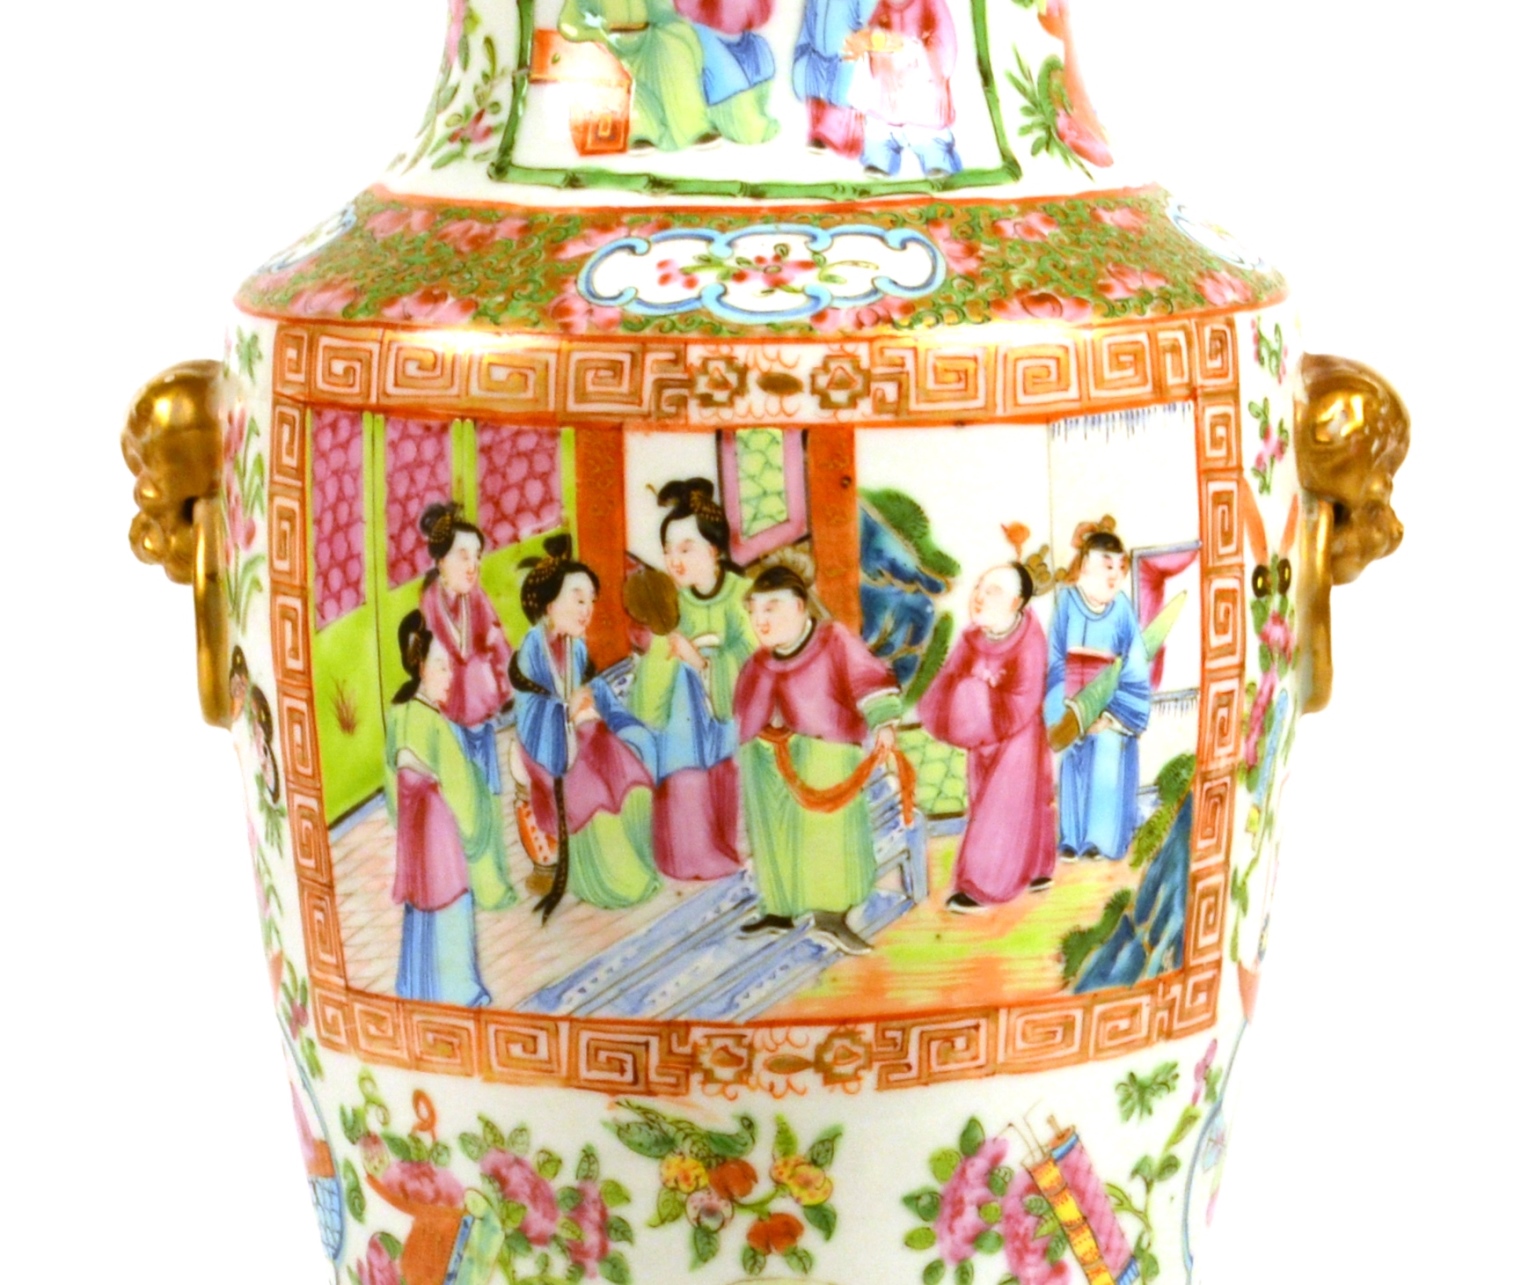 Chinese Export Lamp